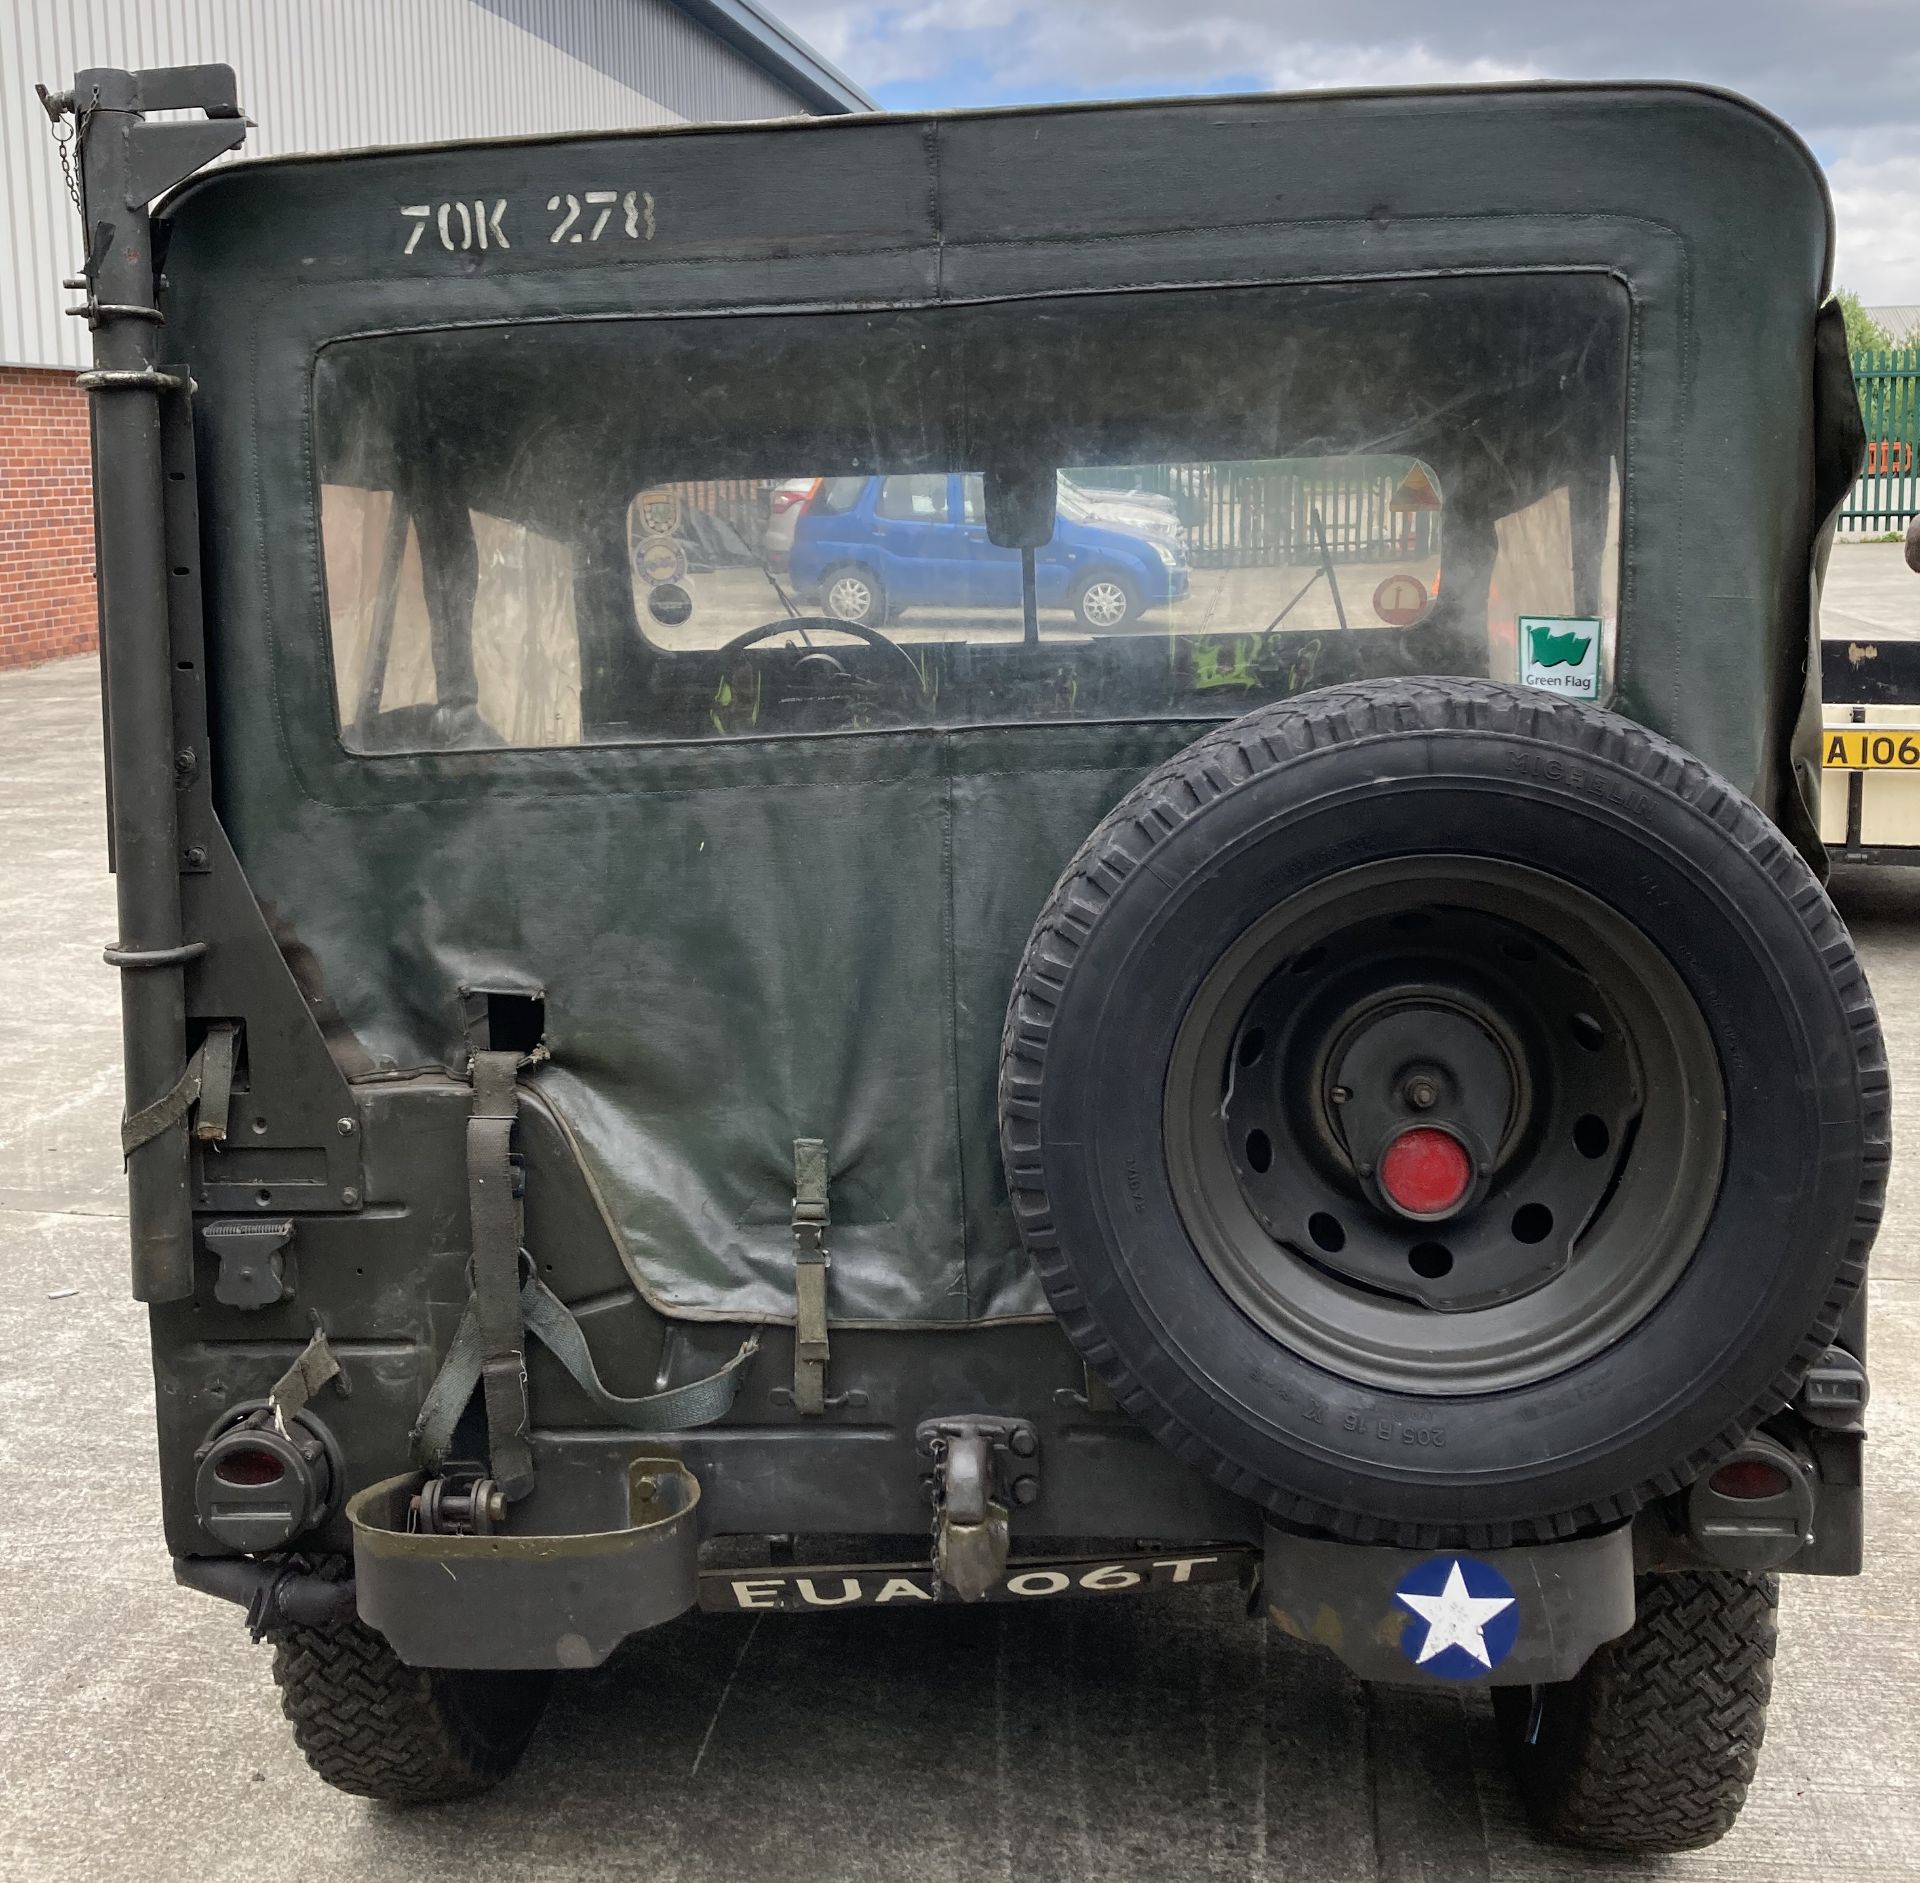 A FORD M151 (WILLYS) 1/4 TON 2.2 LIGHT 4X4 UTILITY JEEP - Petrol - Green - Ex USA Air Force. - Image 4 of 28